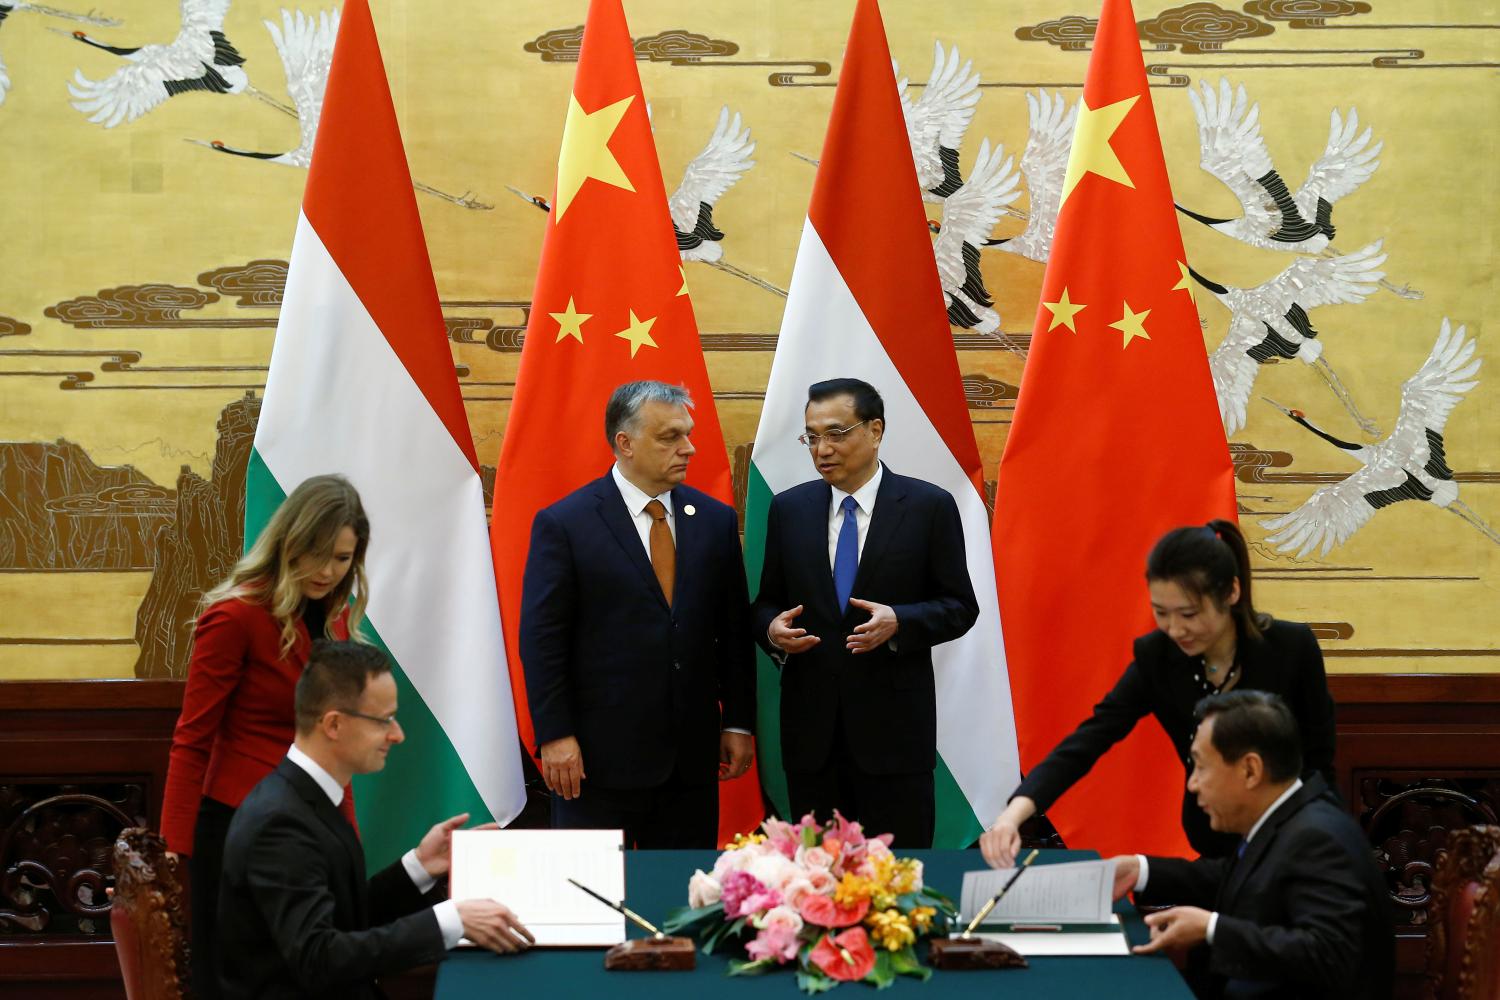 Chinese Premier Li Keqiang and Hungarian Prime Minister Viktor Orban attend signing ceremony at the Great Hall of the People in Beijing, China, May 13, 2017. REUTERS/Thomas Peter - RC16CF374EE0